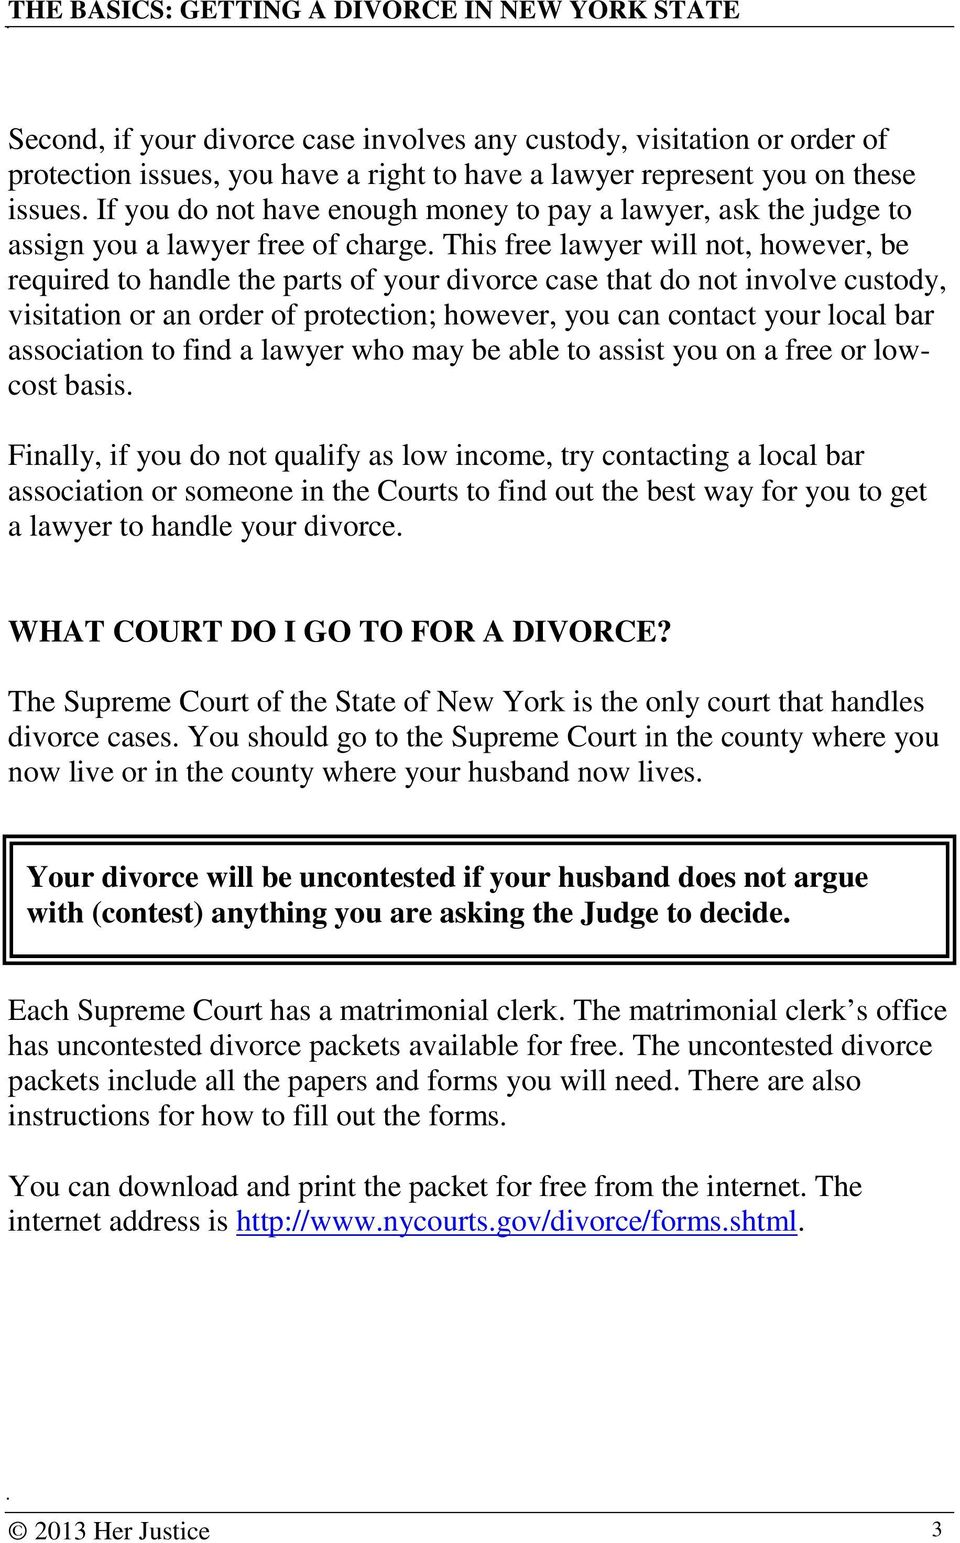 This free lawyer will not, however, be required to handle the parts of your divorce case that do not involve custody, visitation or an order of protection; however, you can contact your local bar